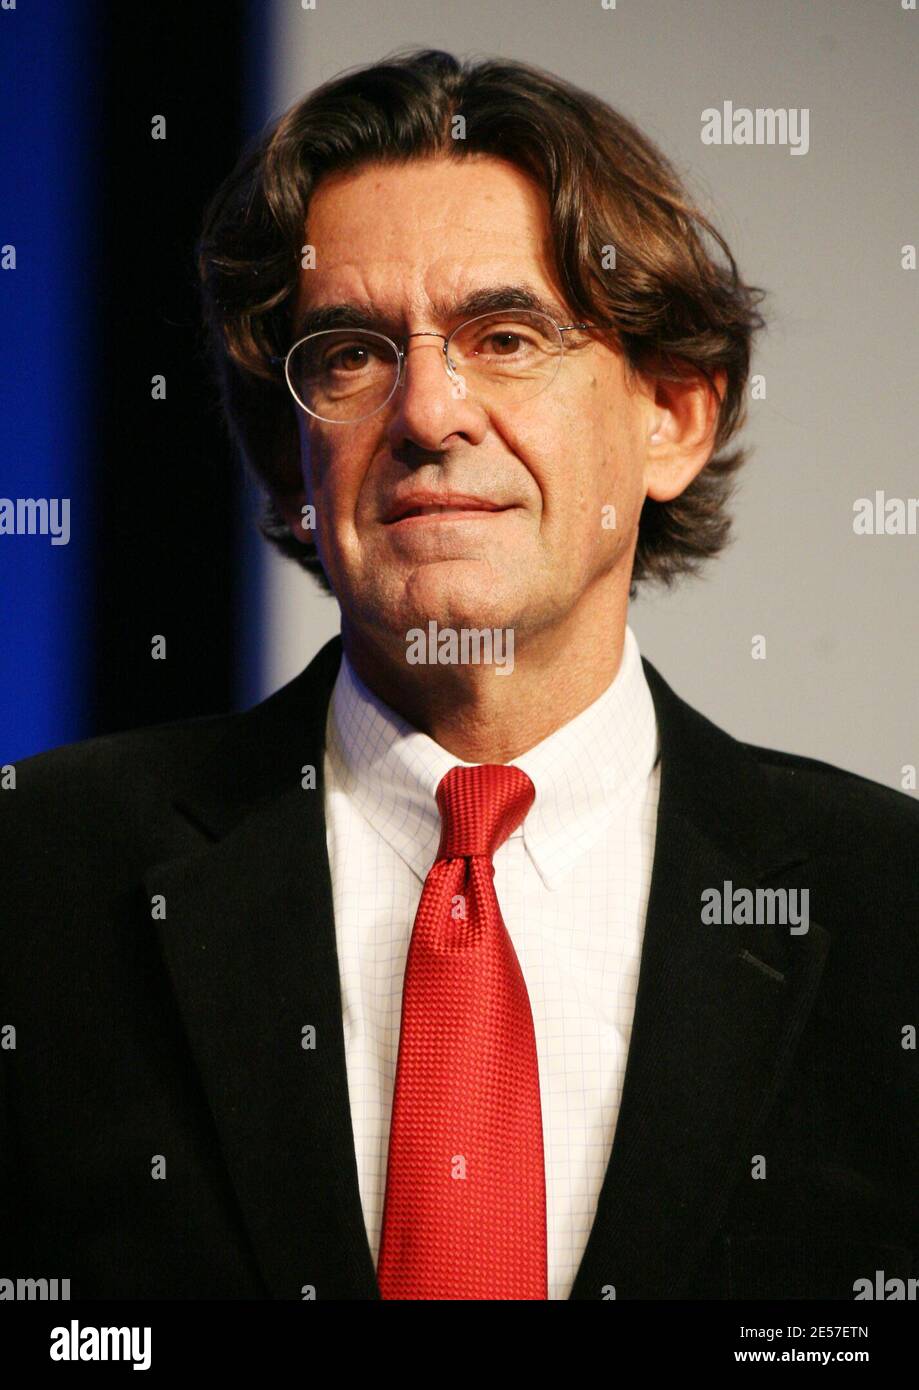 Luc Ferry poses before the Nids d'Or for Nestle party held at the Theatre des Champs-Elysees in Paris, France on September 15, 2008. Photo by Denis Guignebourg/ABACAPRESS.COM Stock Photo